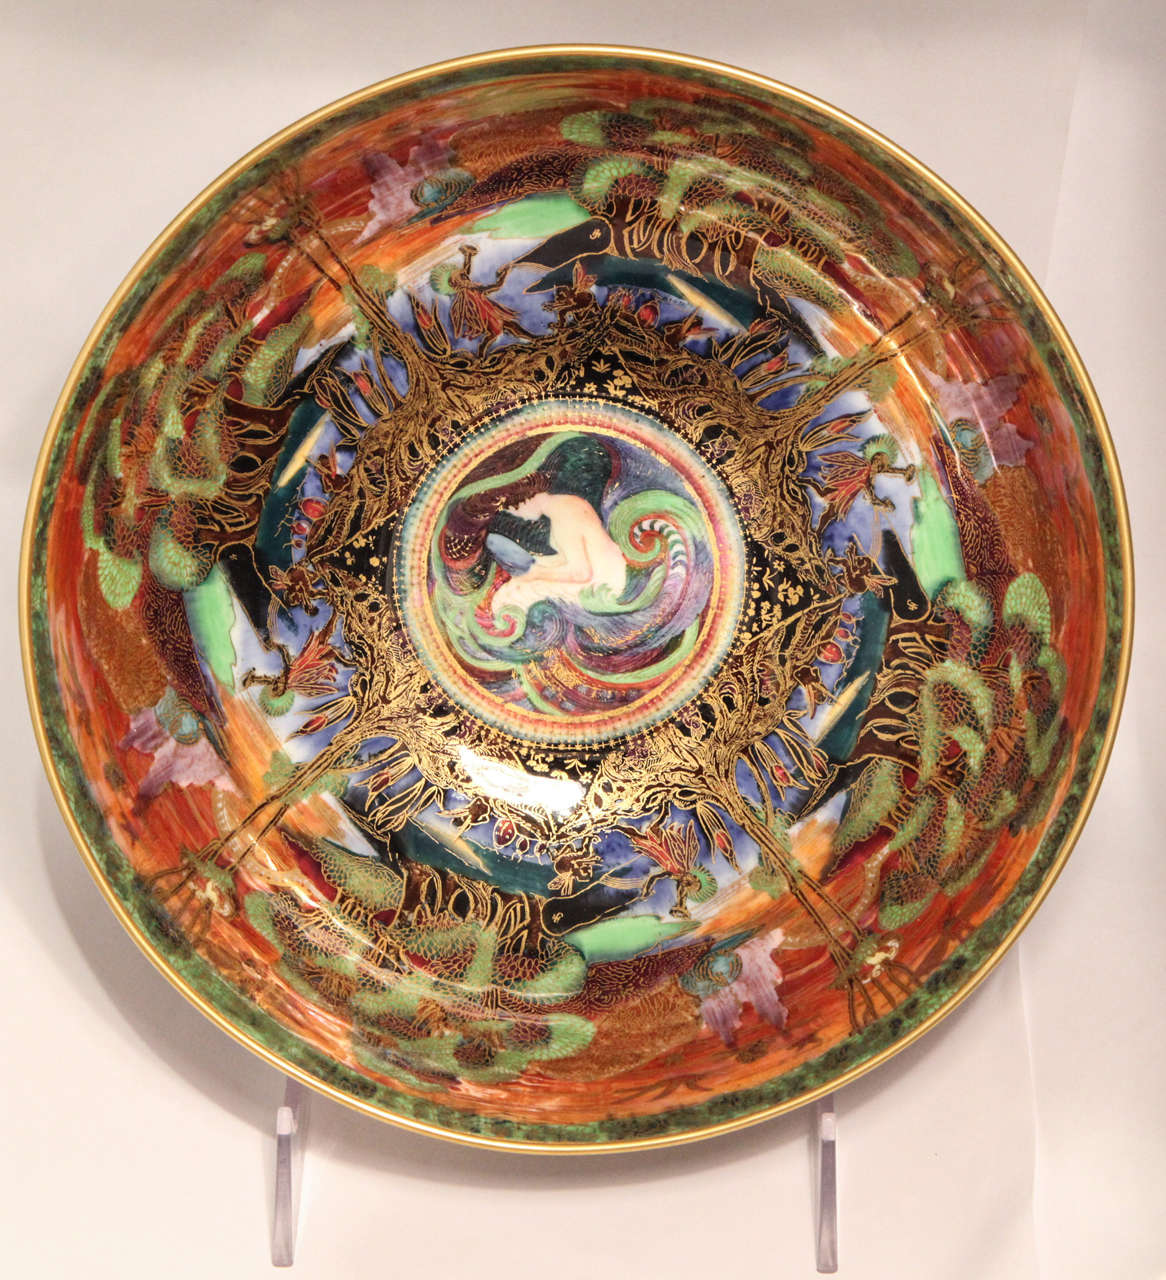 British Rare Wedgwood Fairyland Lustre Footed Bowl For Sale